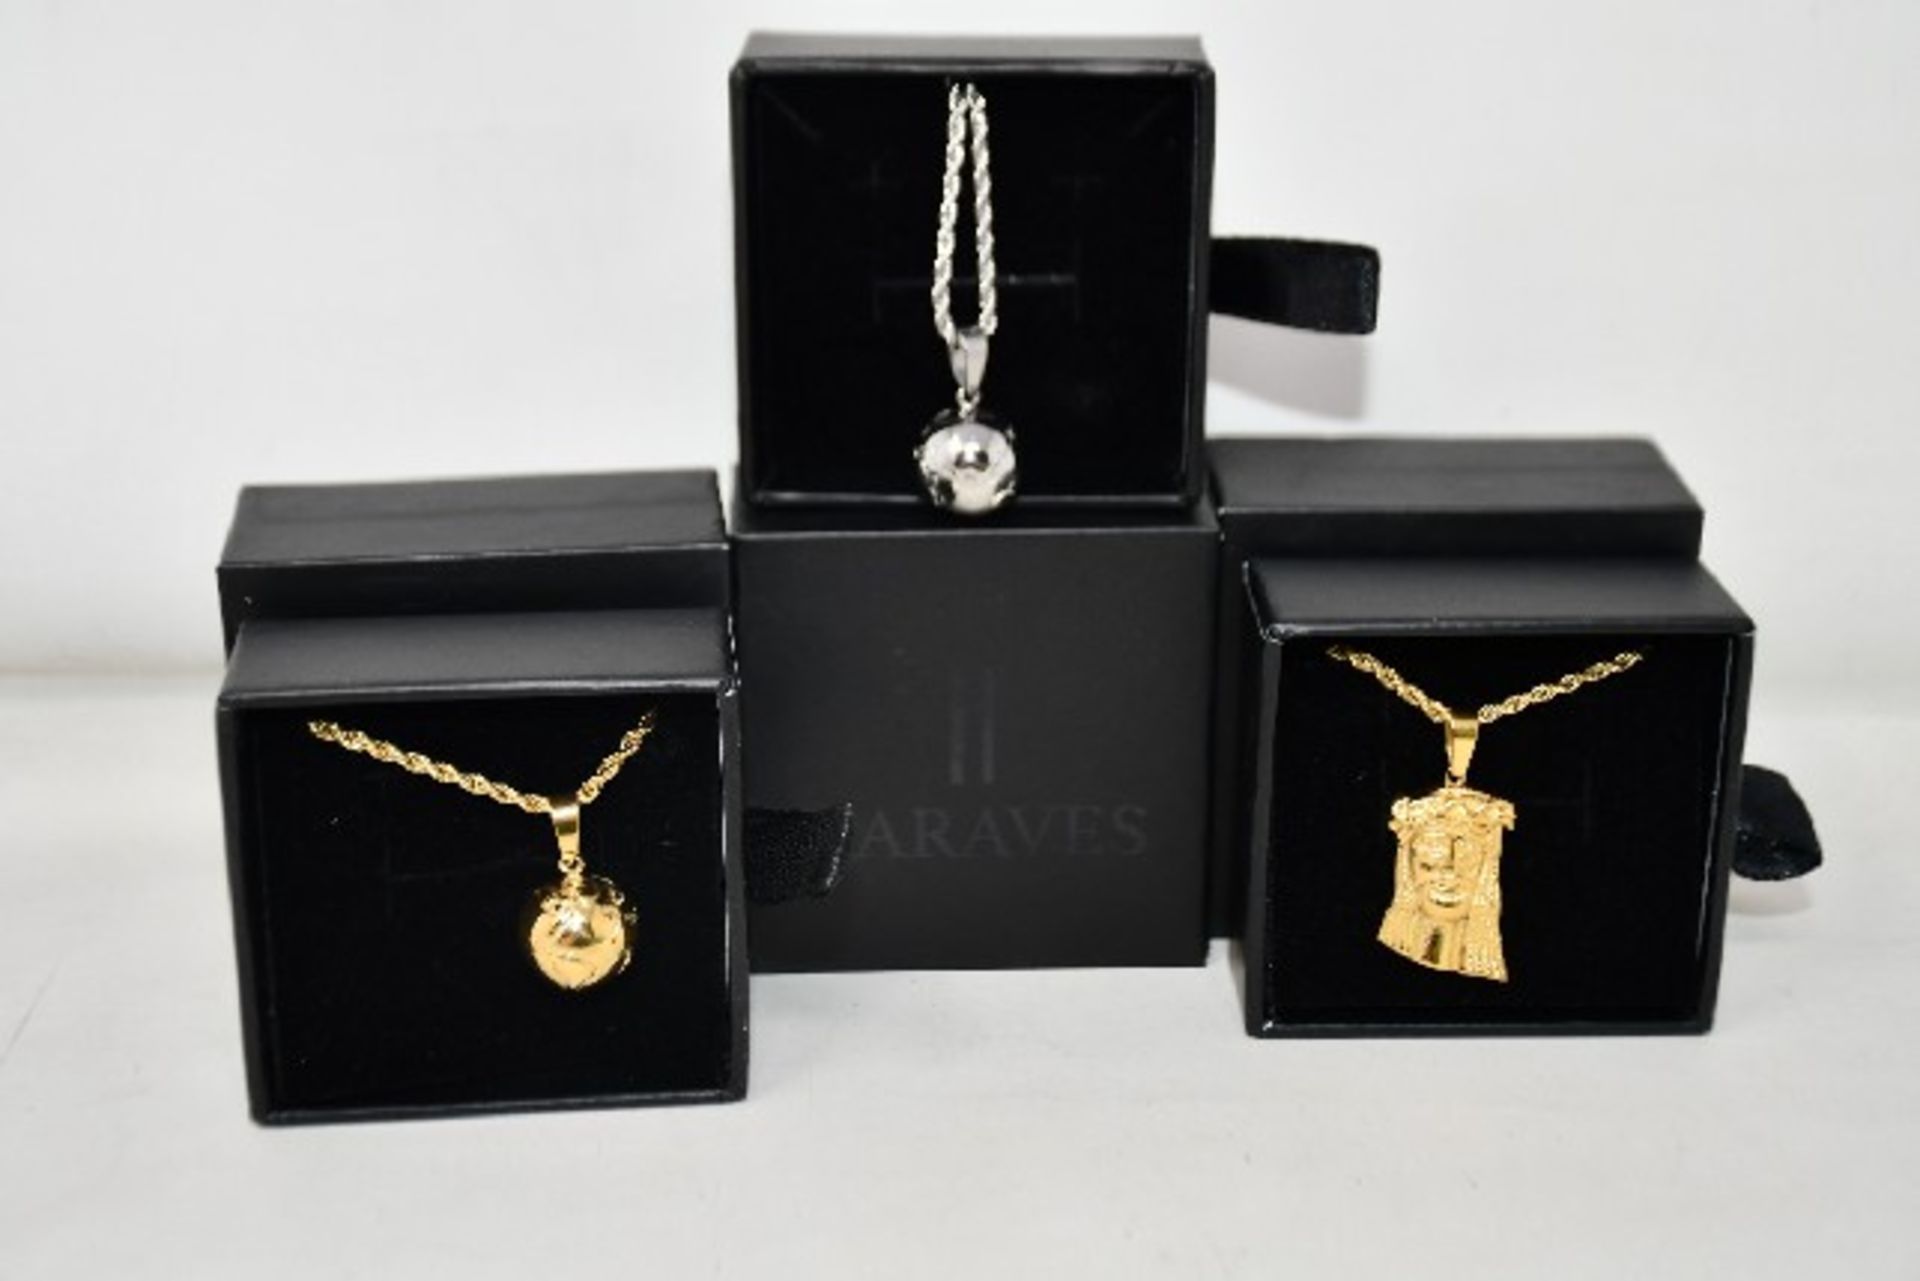 Fifteen items of assorted Haraves jewellery to include 5x silver and 5x gold Globes and 5x Jesus.